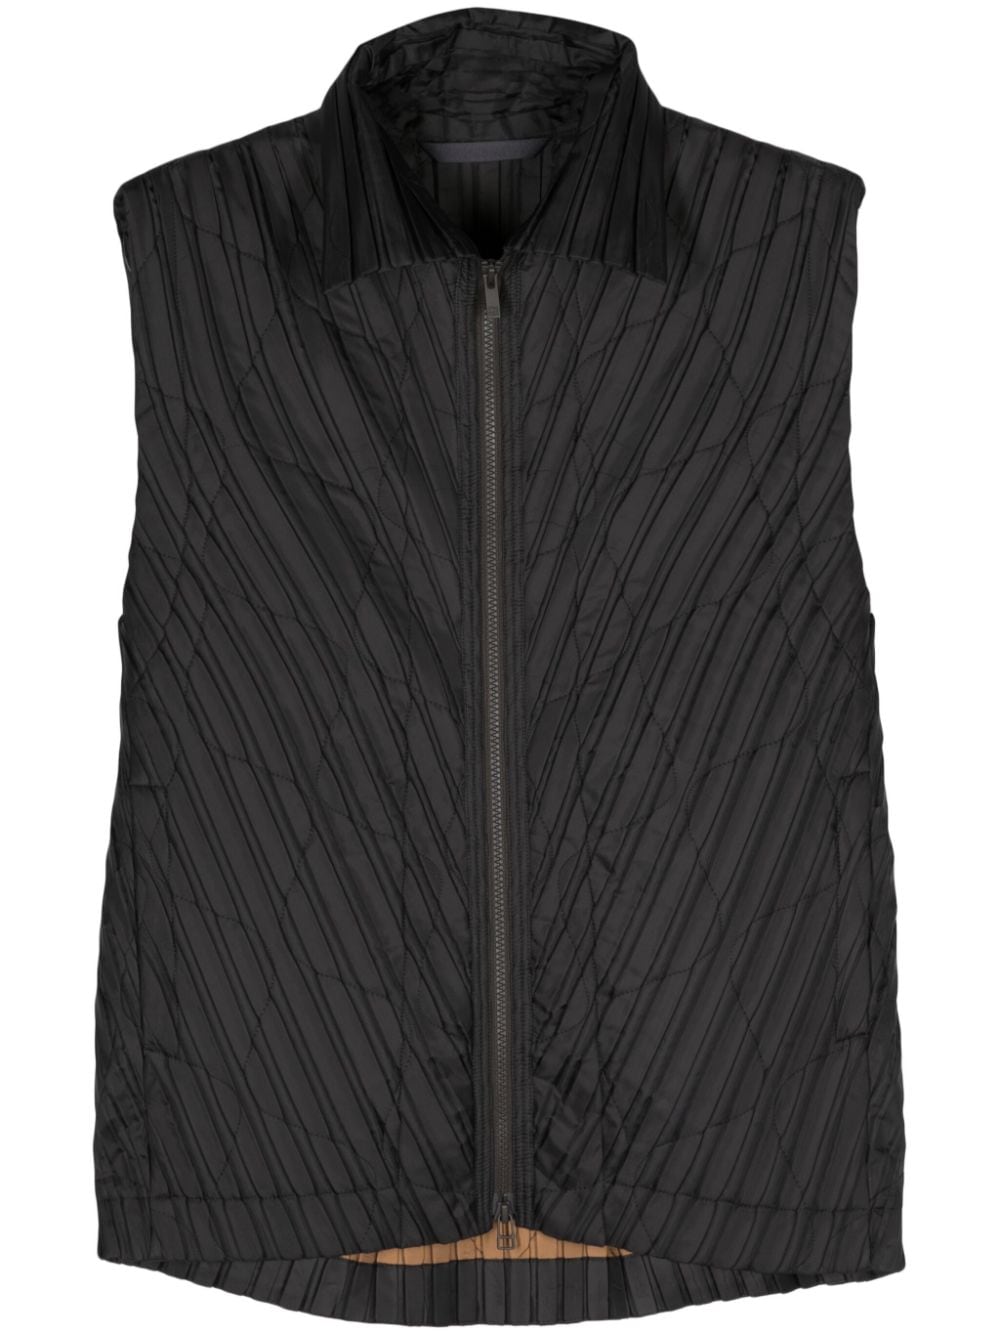 Homme Plissé Issey Miyake pleated zip-up gilet - Brown von Homme Plissé Issey Miyake